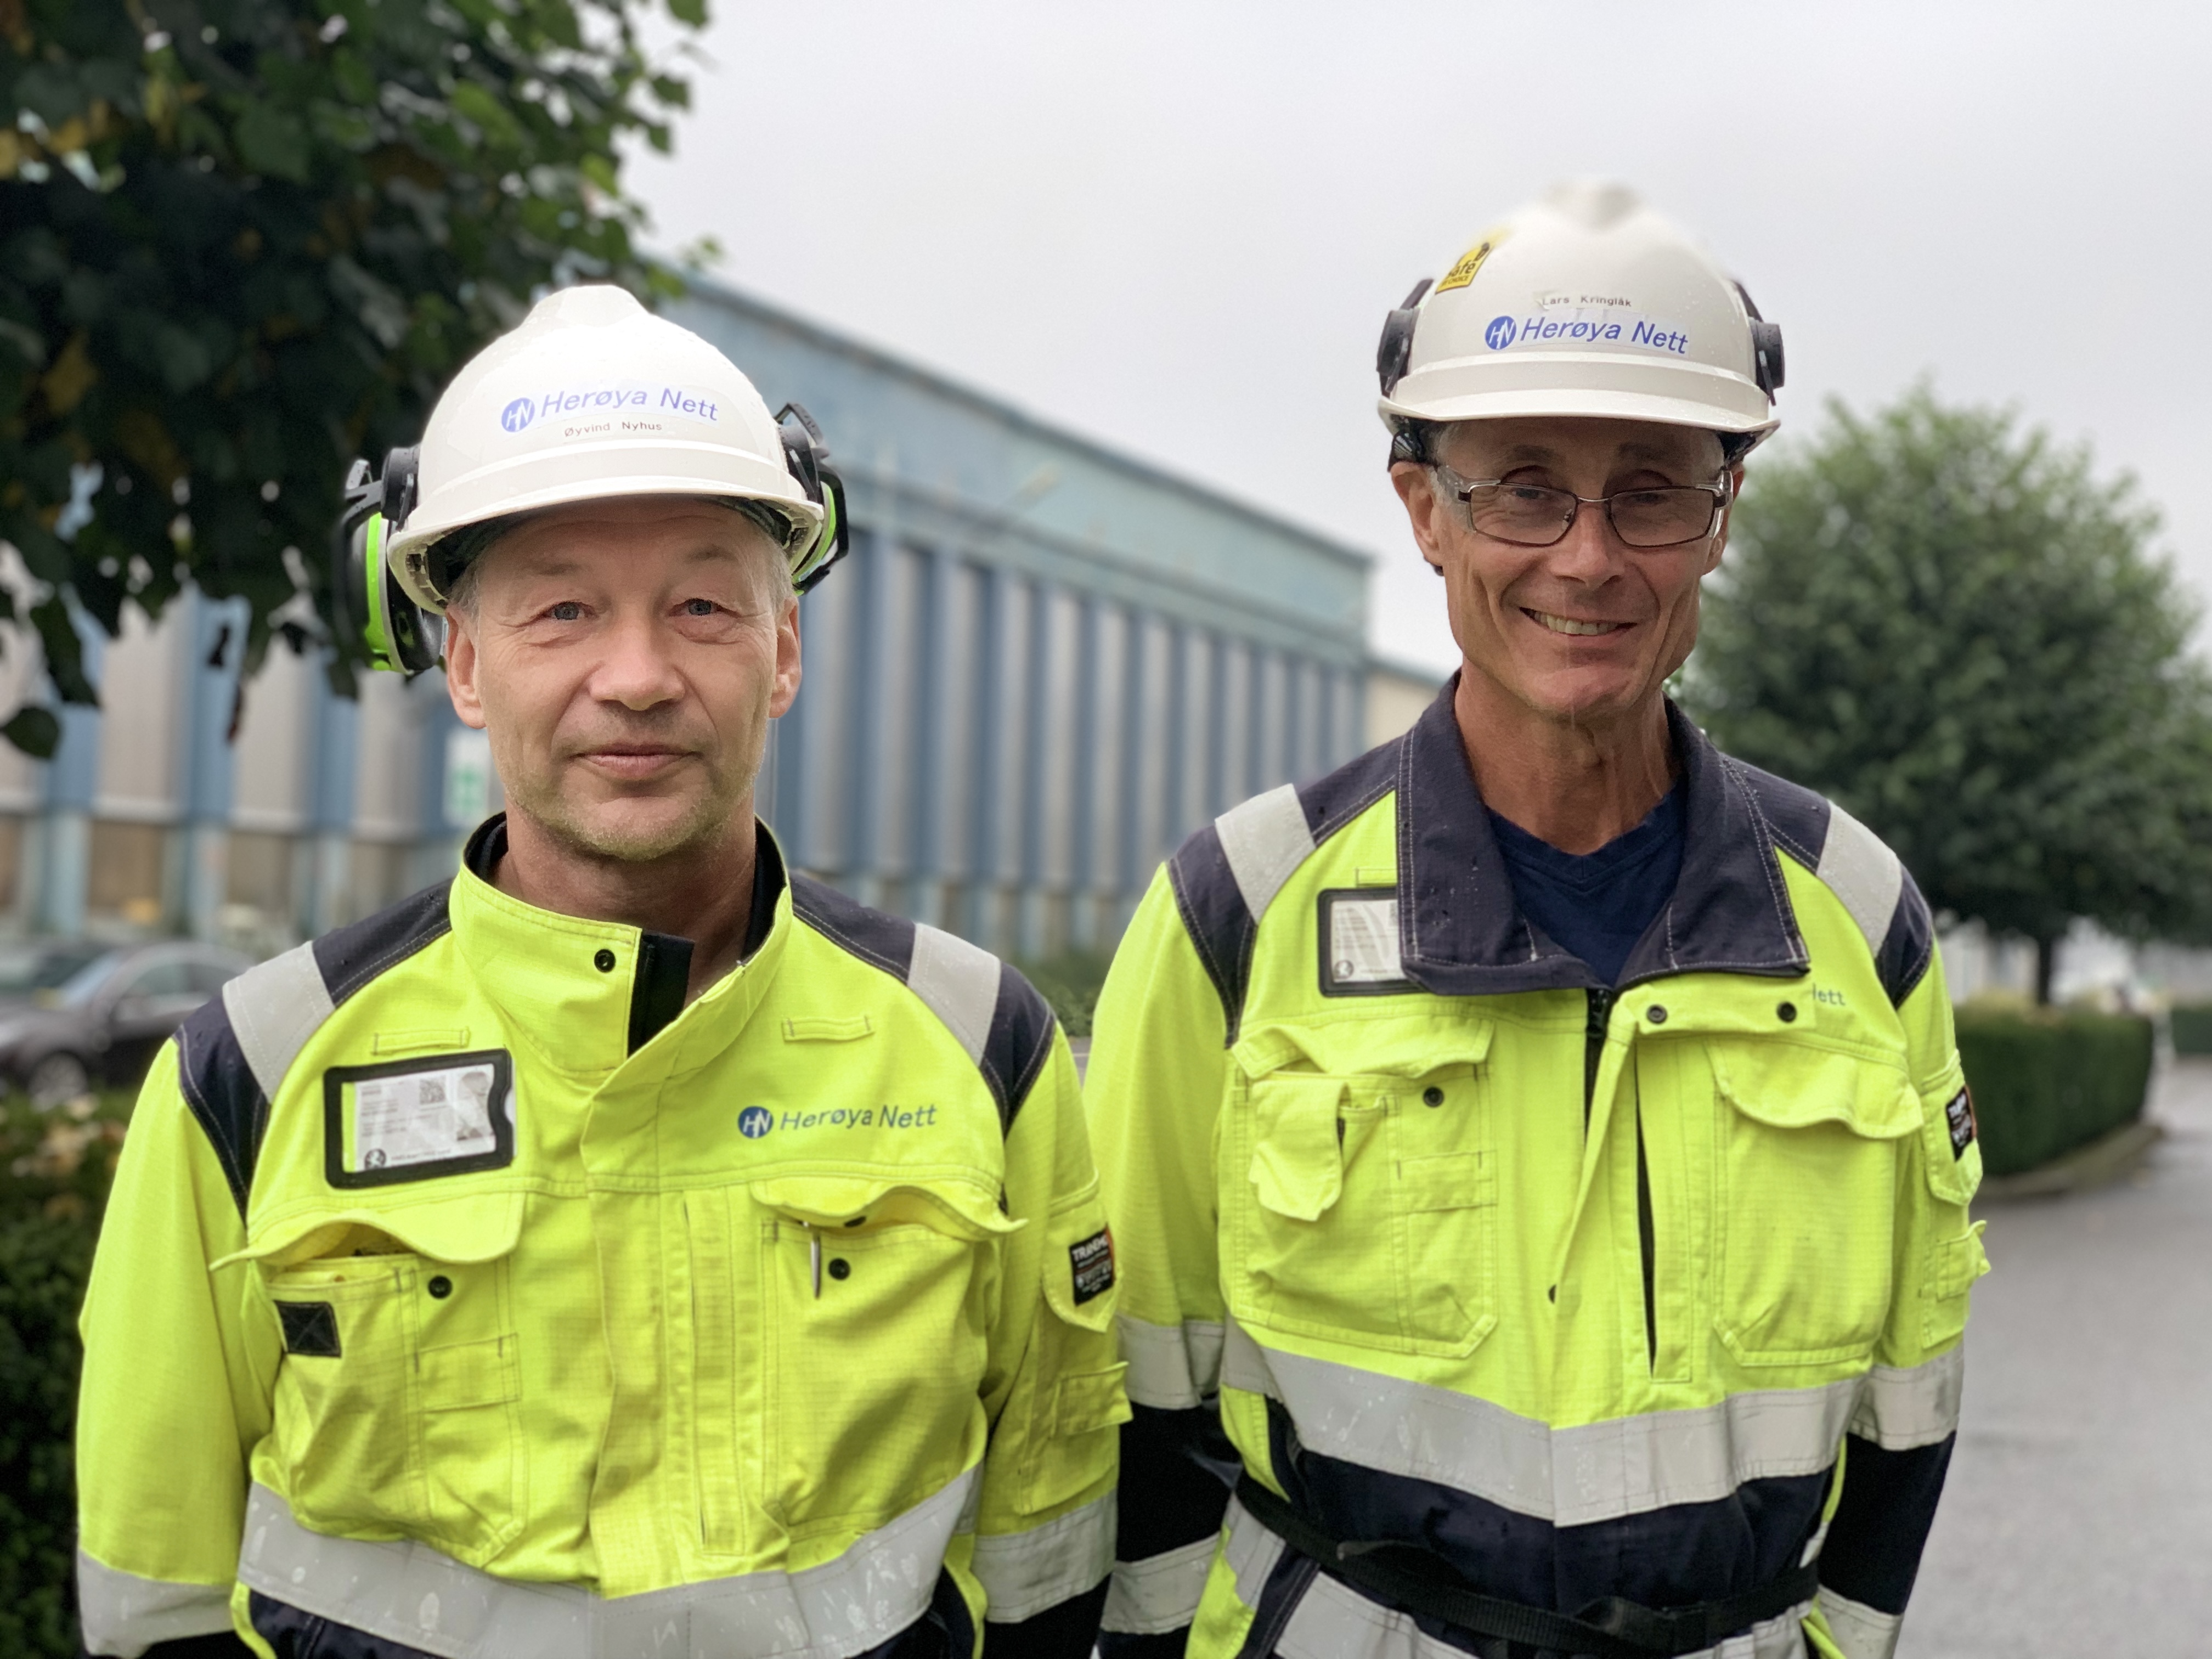 two men next to eachother, posing, yellow jackets, white helmets, in a street in an industry area, green trees and an indstrial building in background